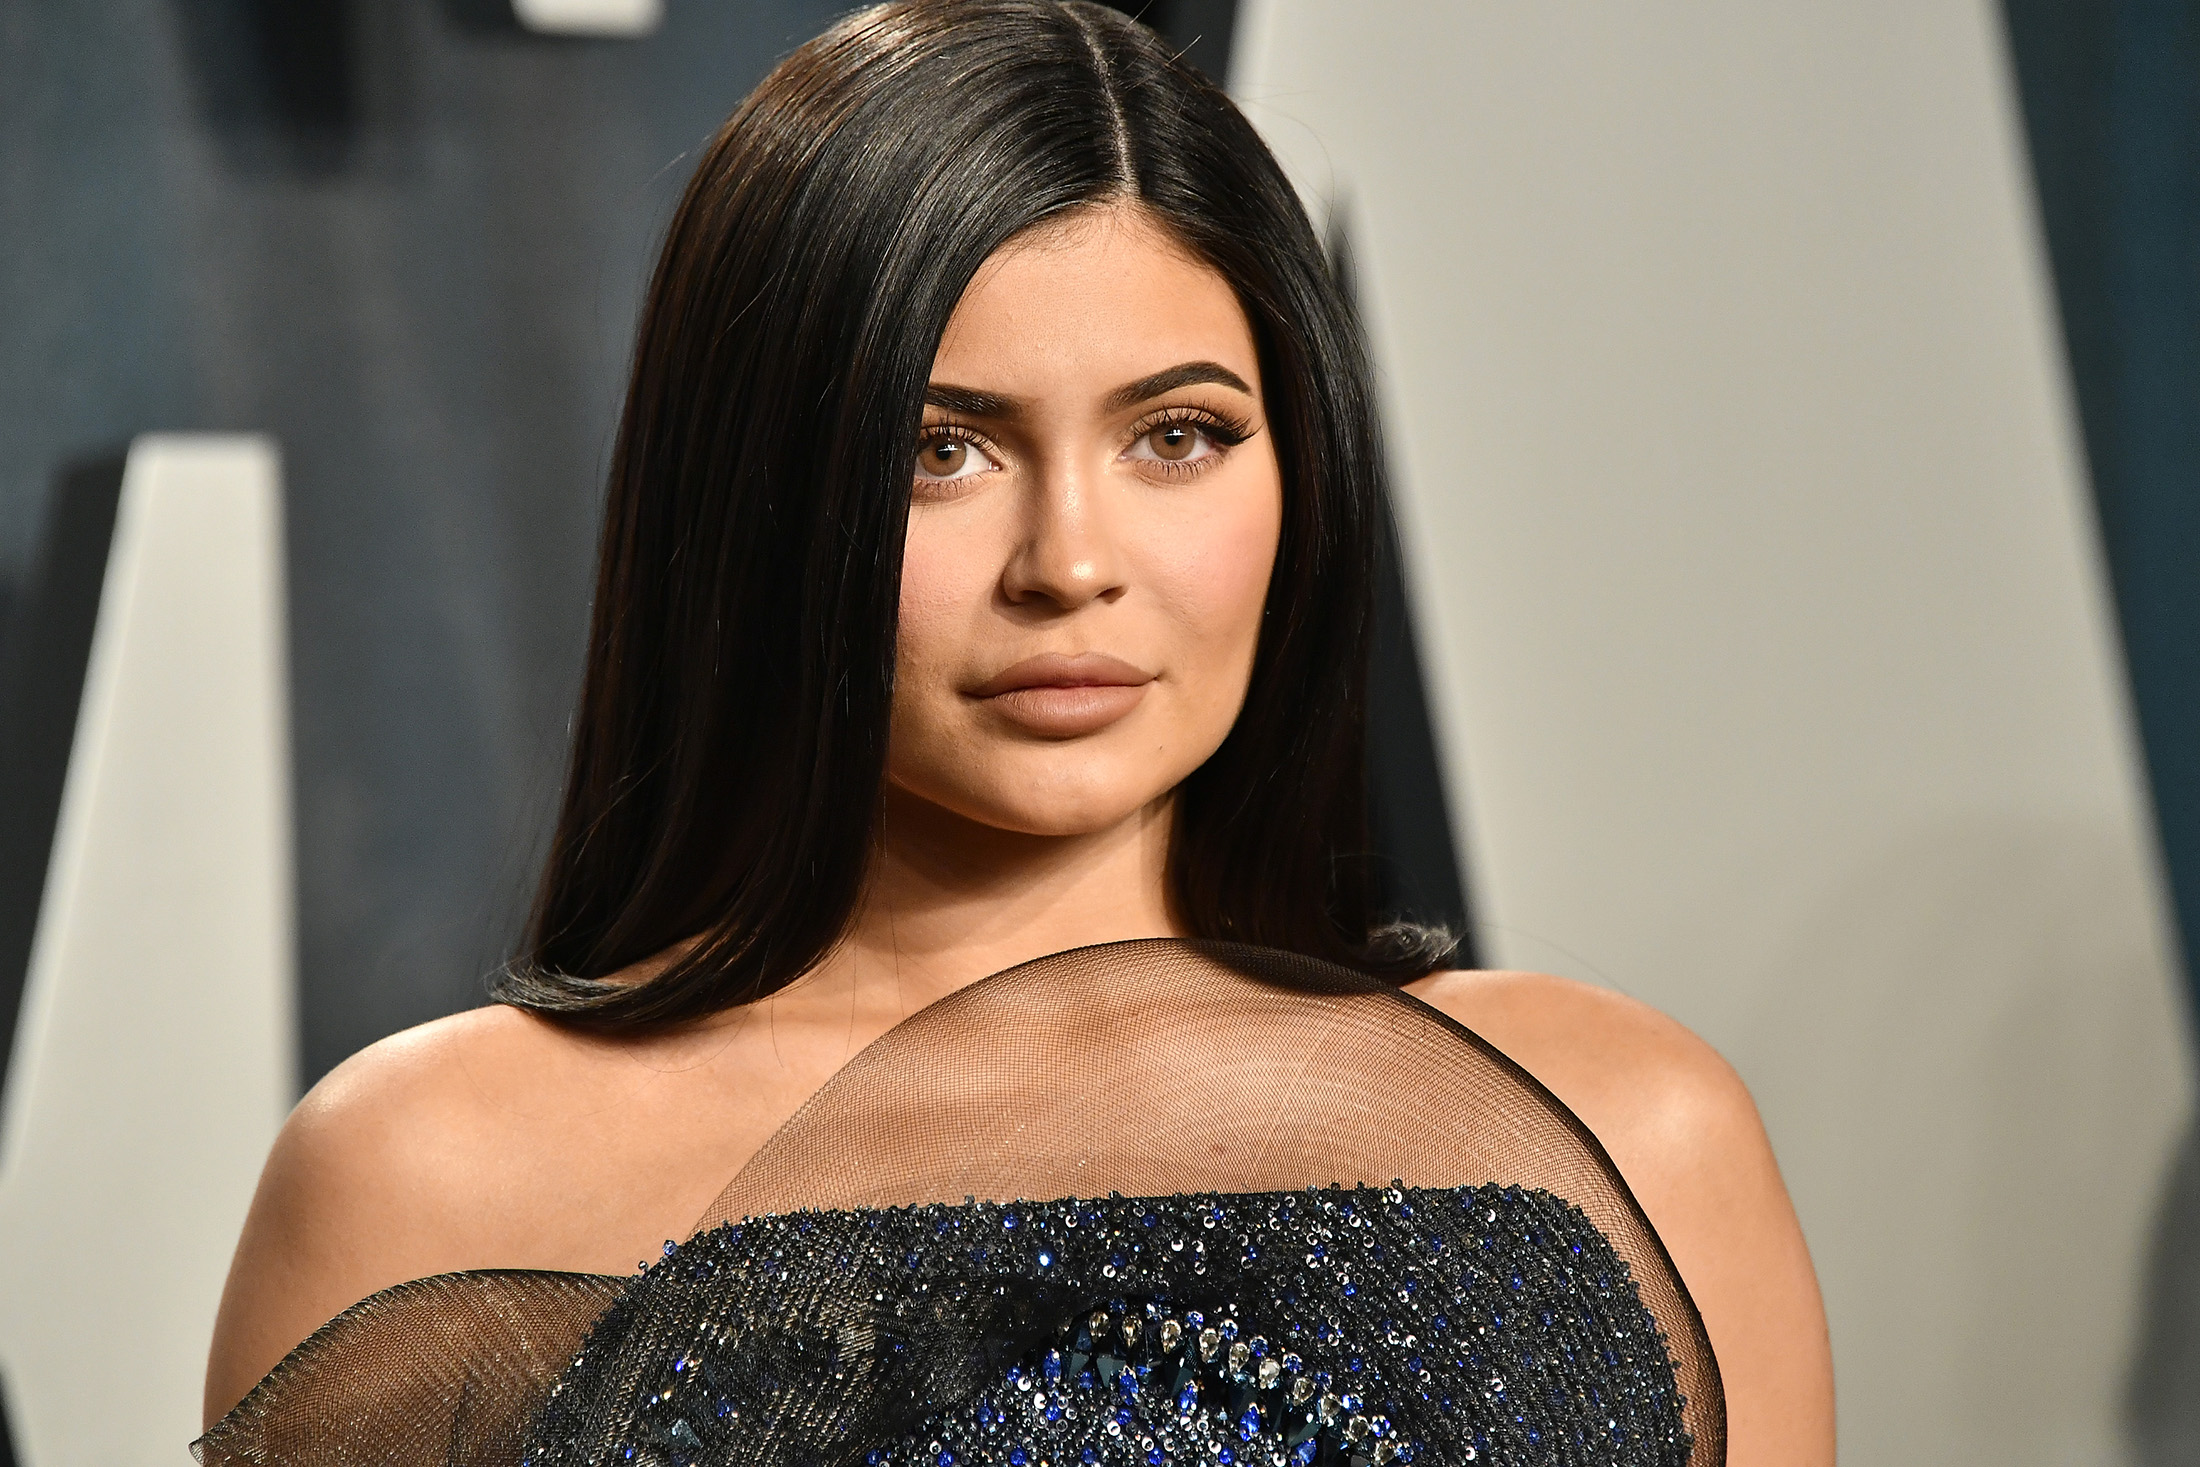 Kylie Jenner is no longer the most-followed woman on Instagram